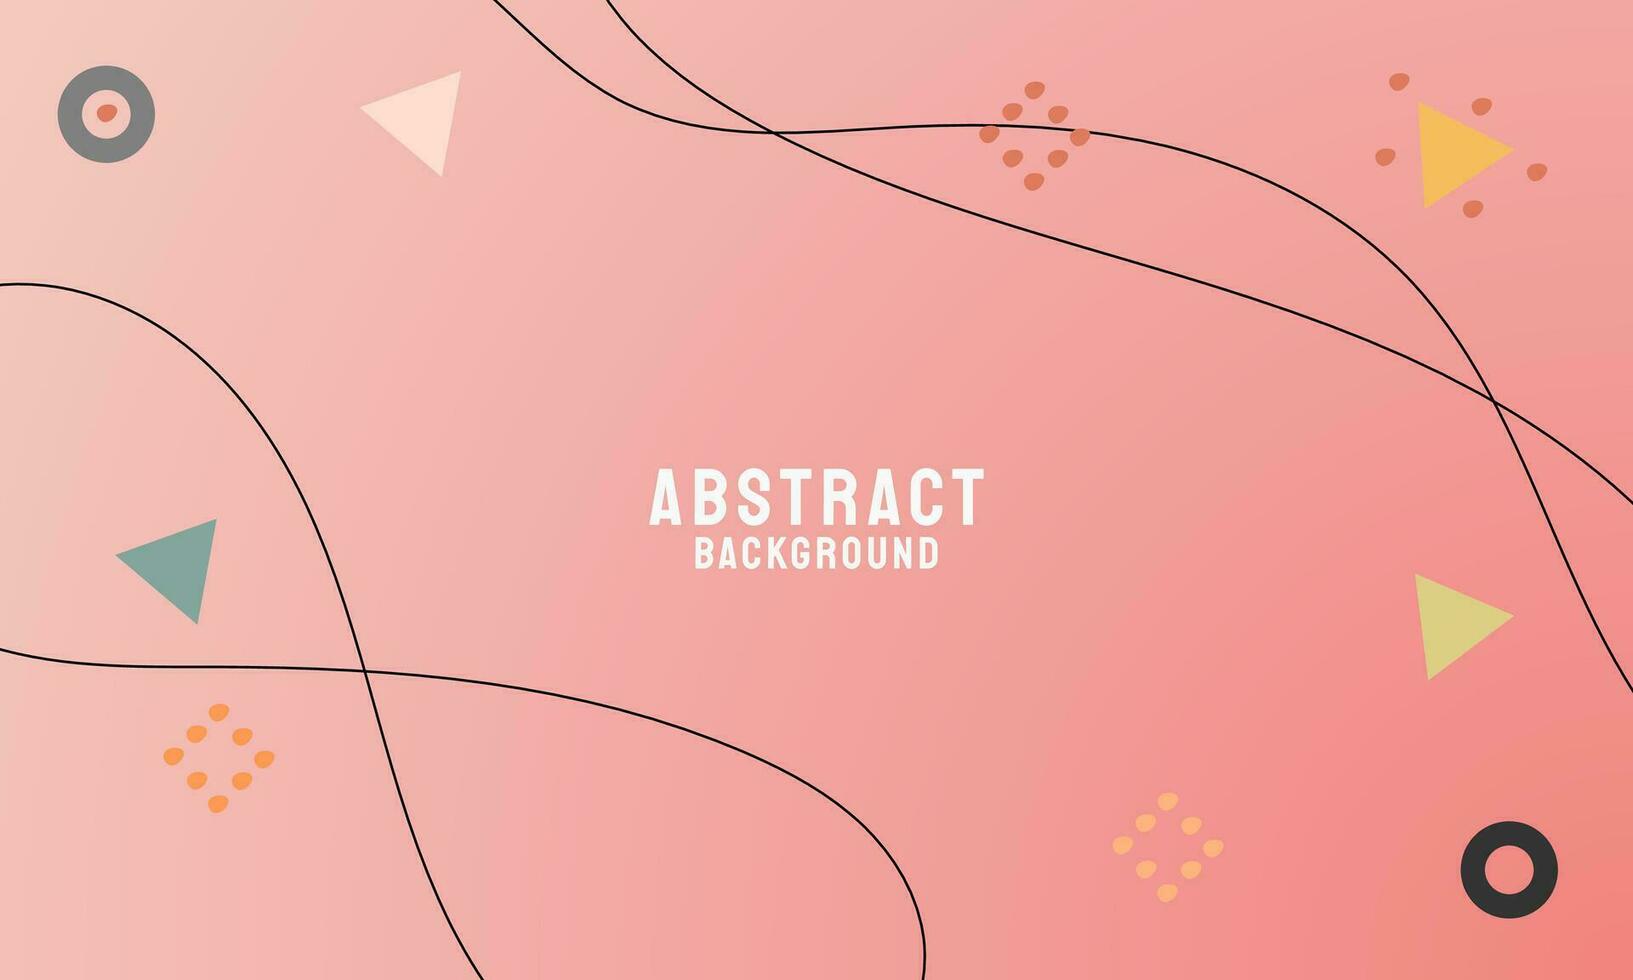 Abstract background of element shapes, dynamic line art. Minimalist style concept for creative ideas, flyer, presentation, digital, website vector